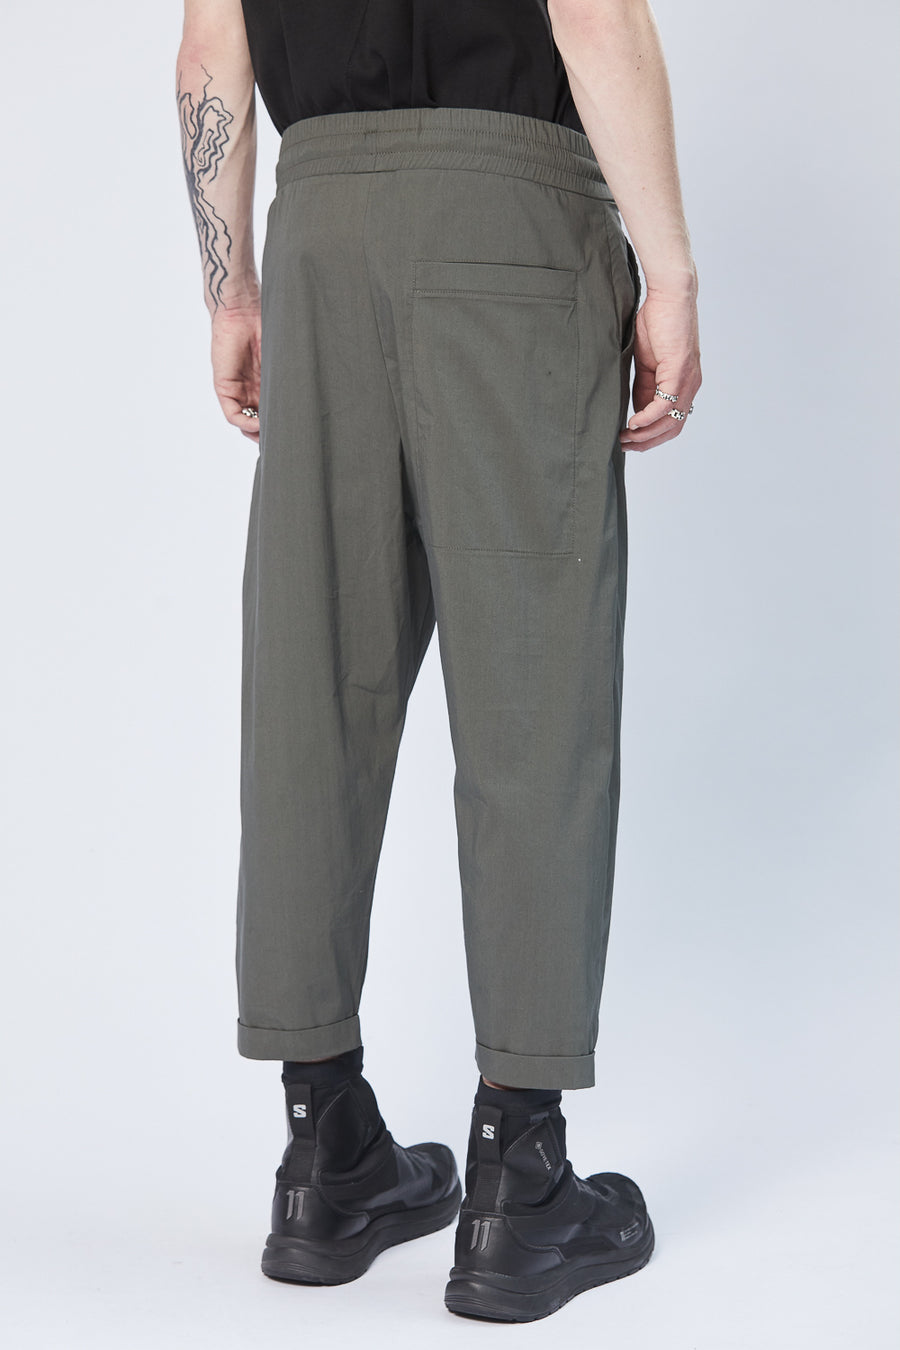 Buy the Thom Krom M ST 431 Sweatpants in Green at Intro. Spend £50 for free UK delivery. Official stockists. We ship worldwide.